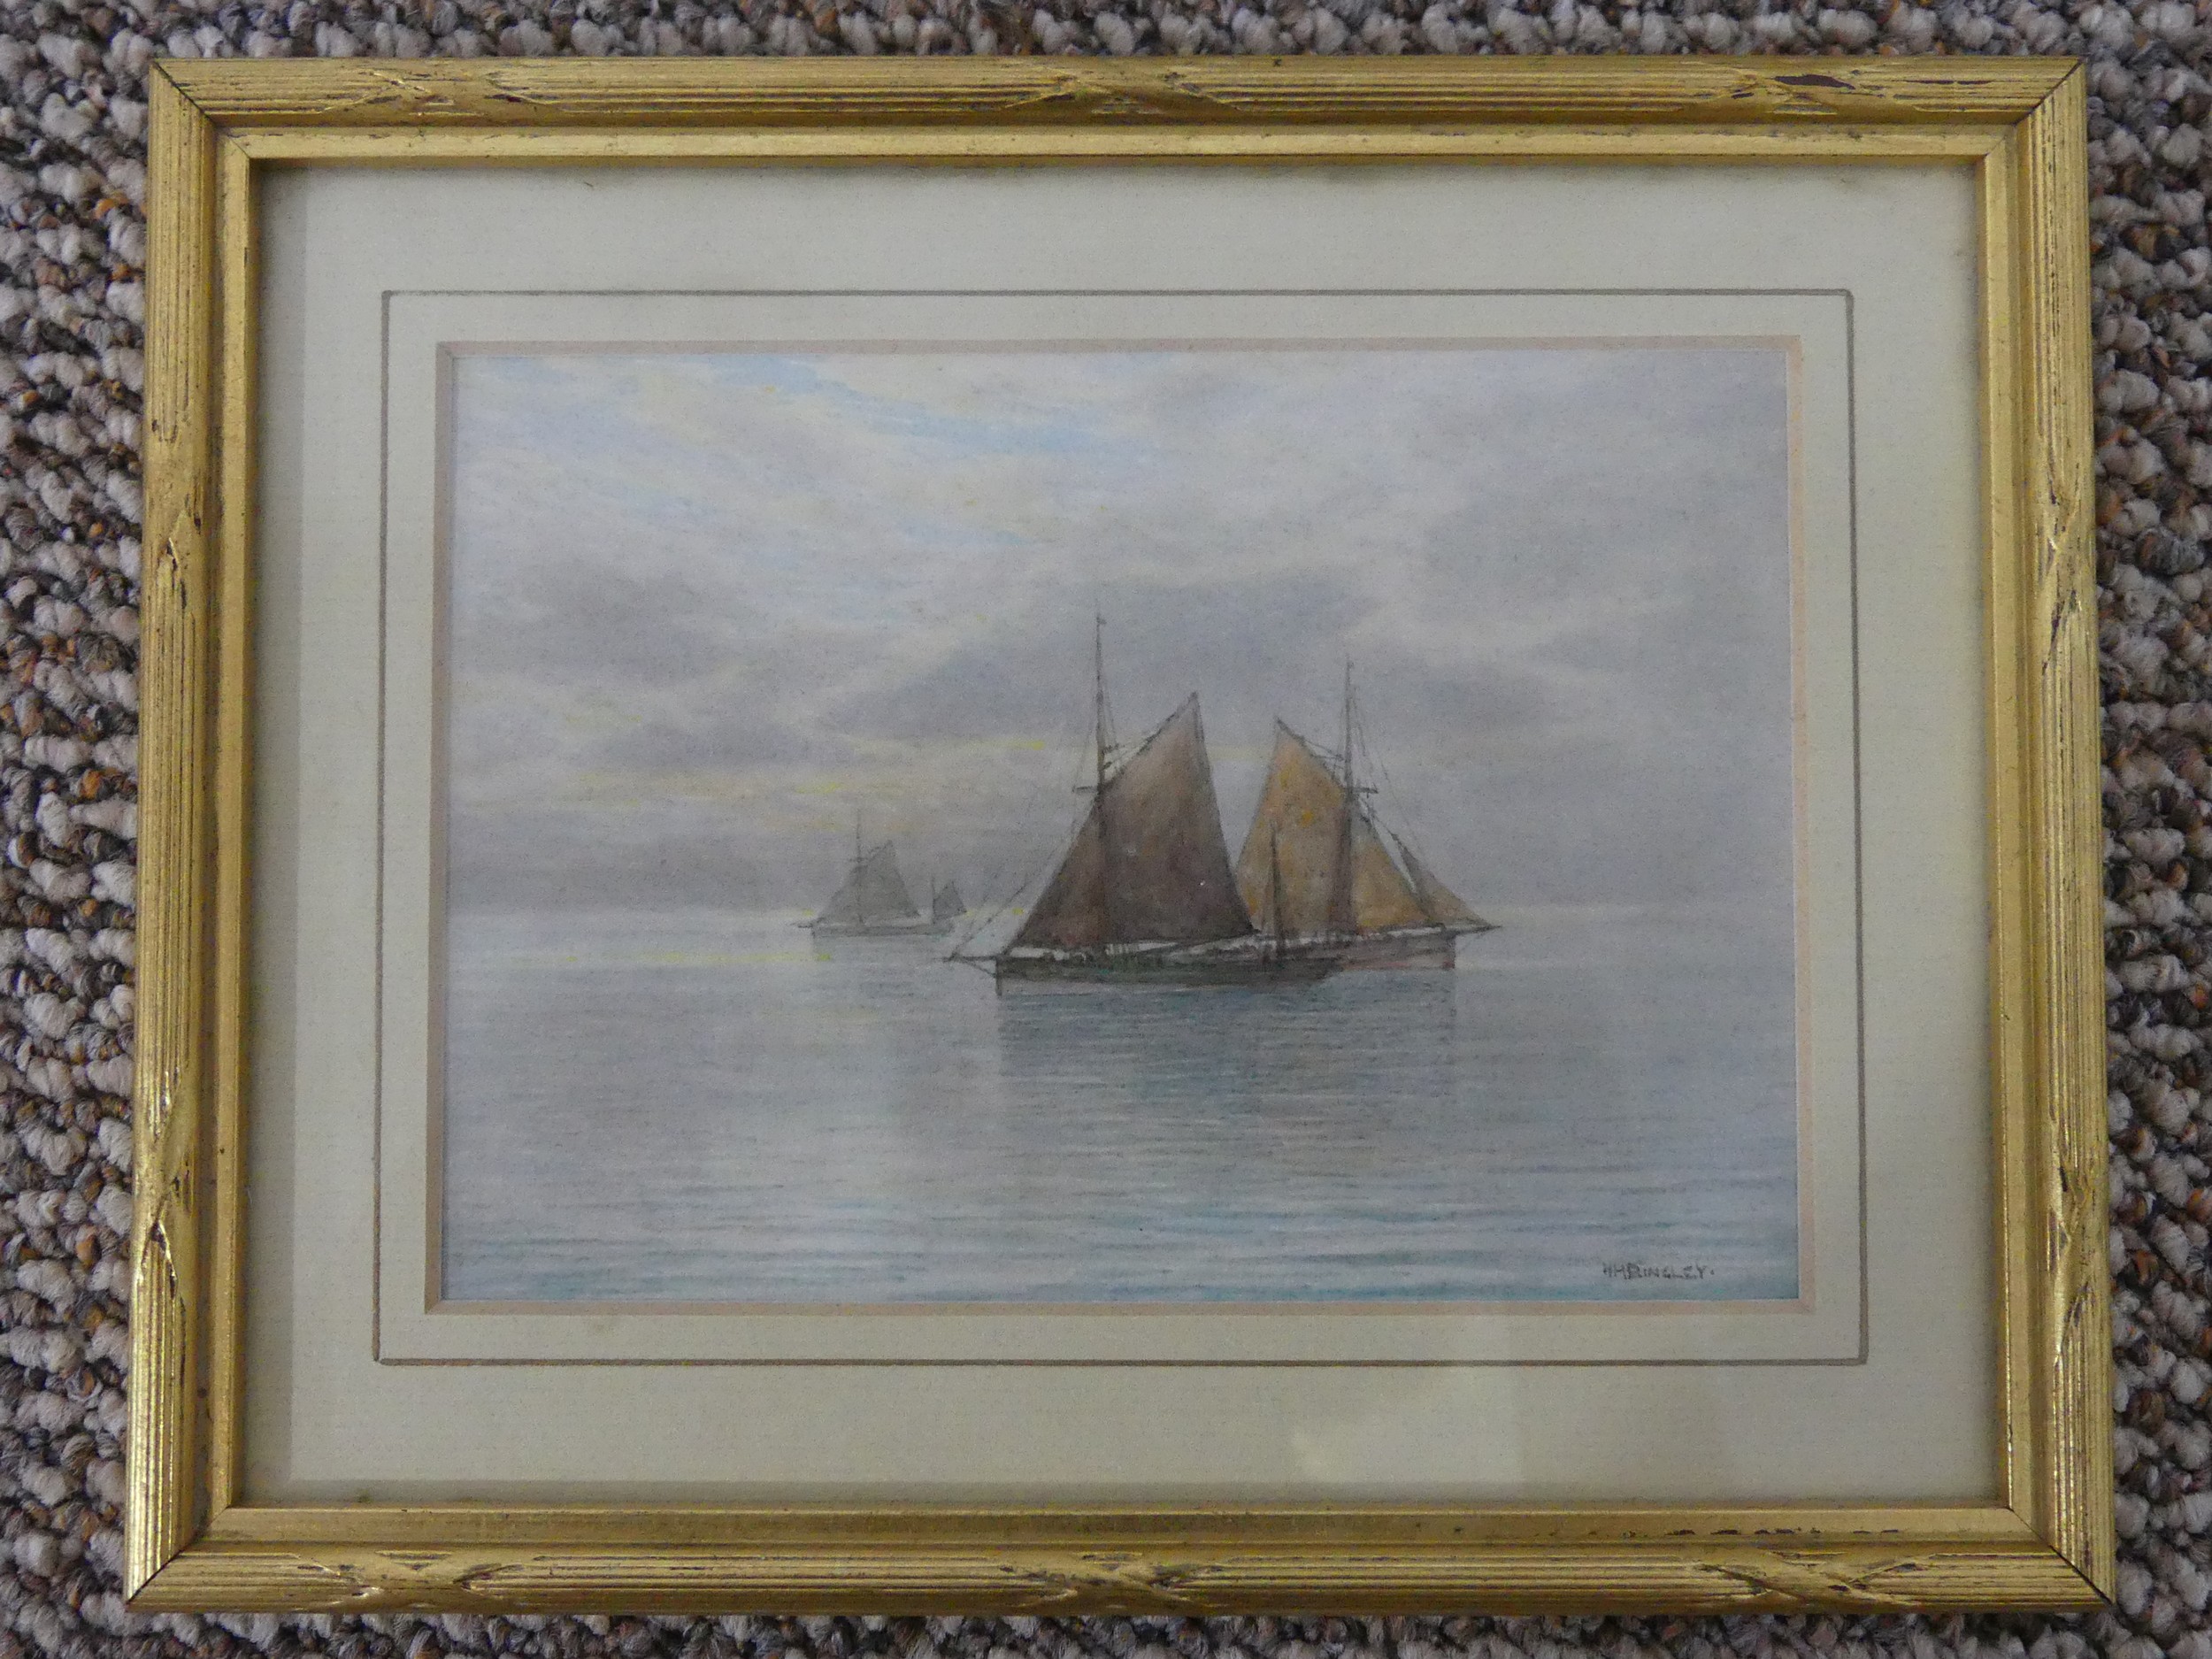 Herbert Harding Bingley (1841-1920), Watercolour of Boats on a calm Sea, signed bottom right, - Image 7 of 12